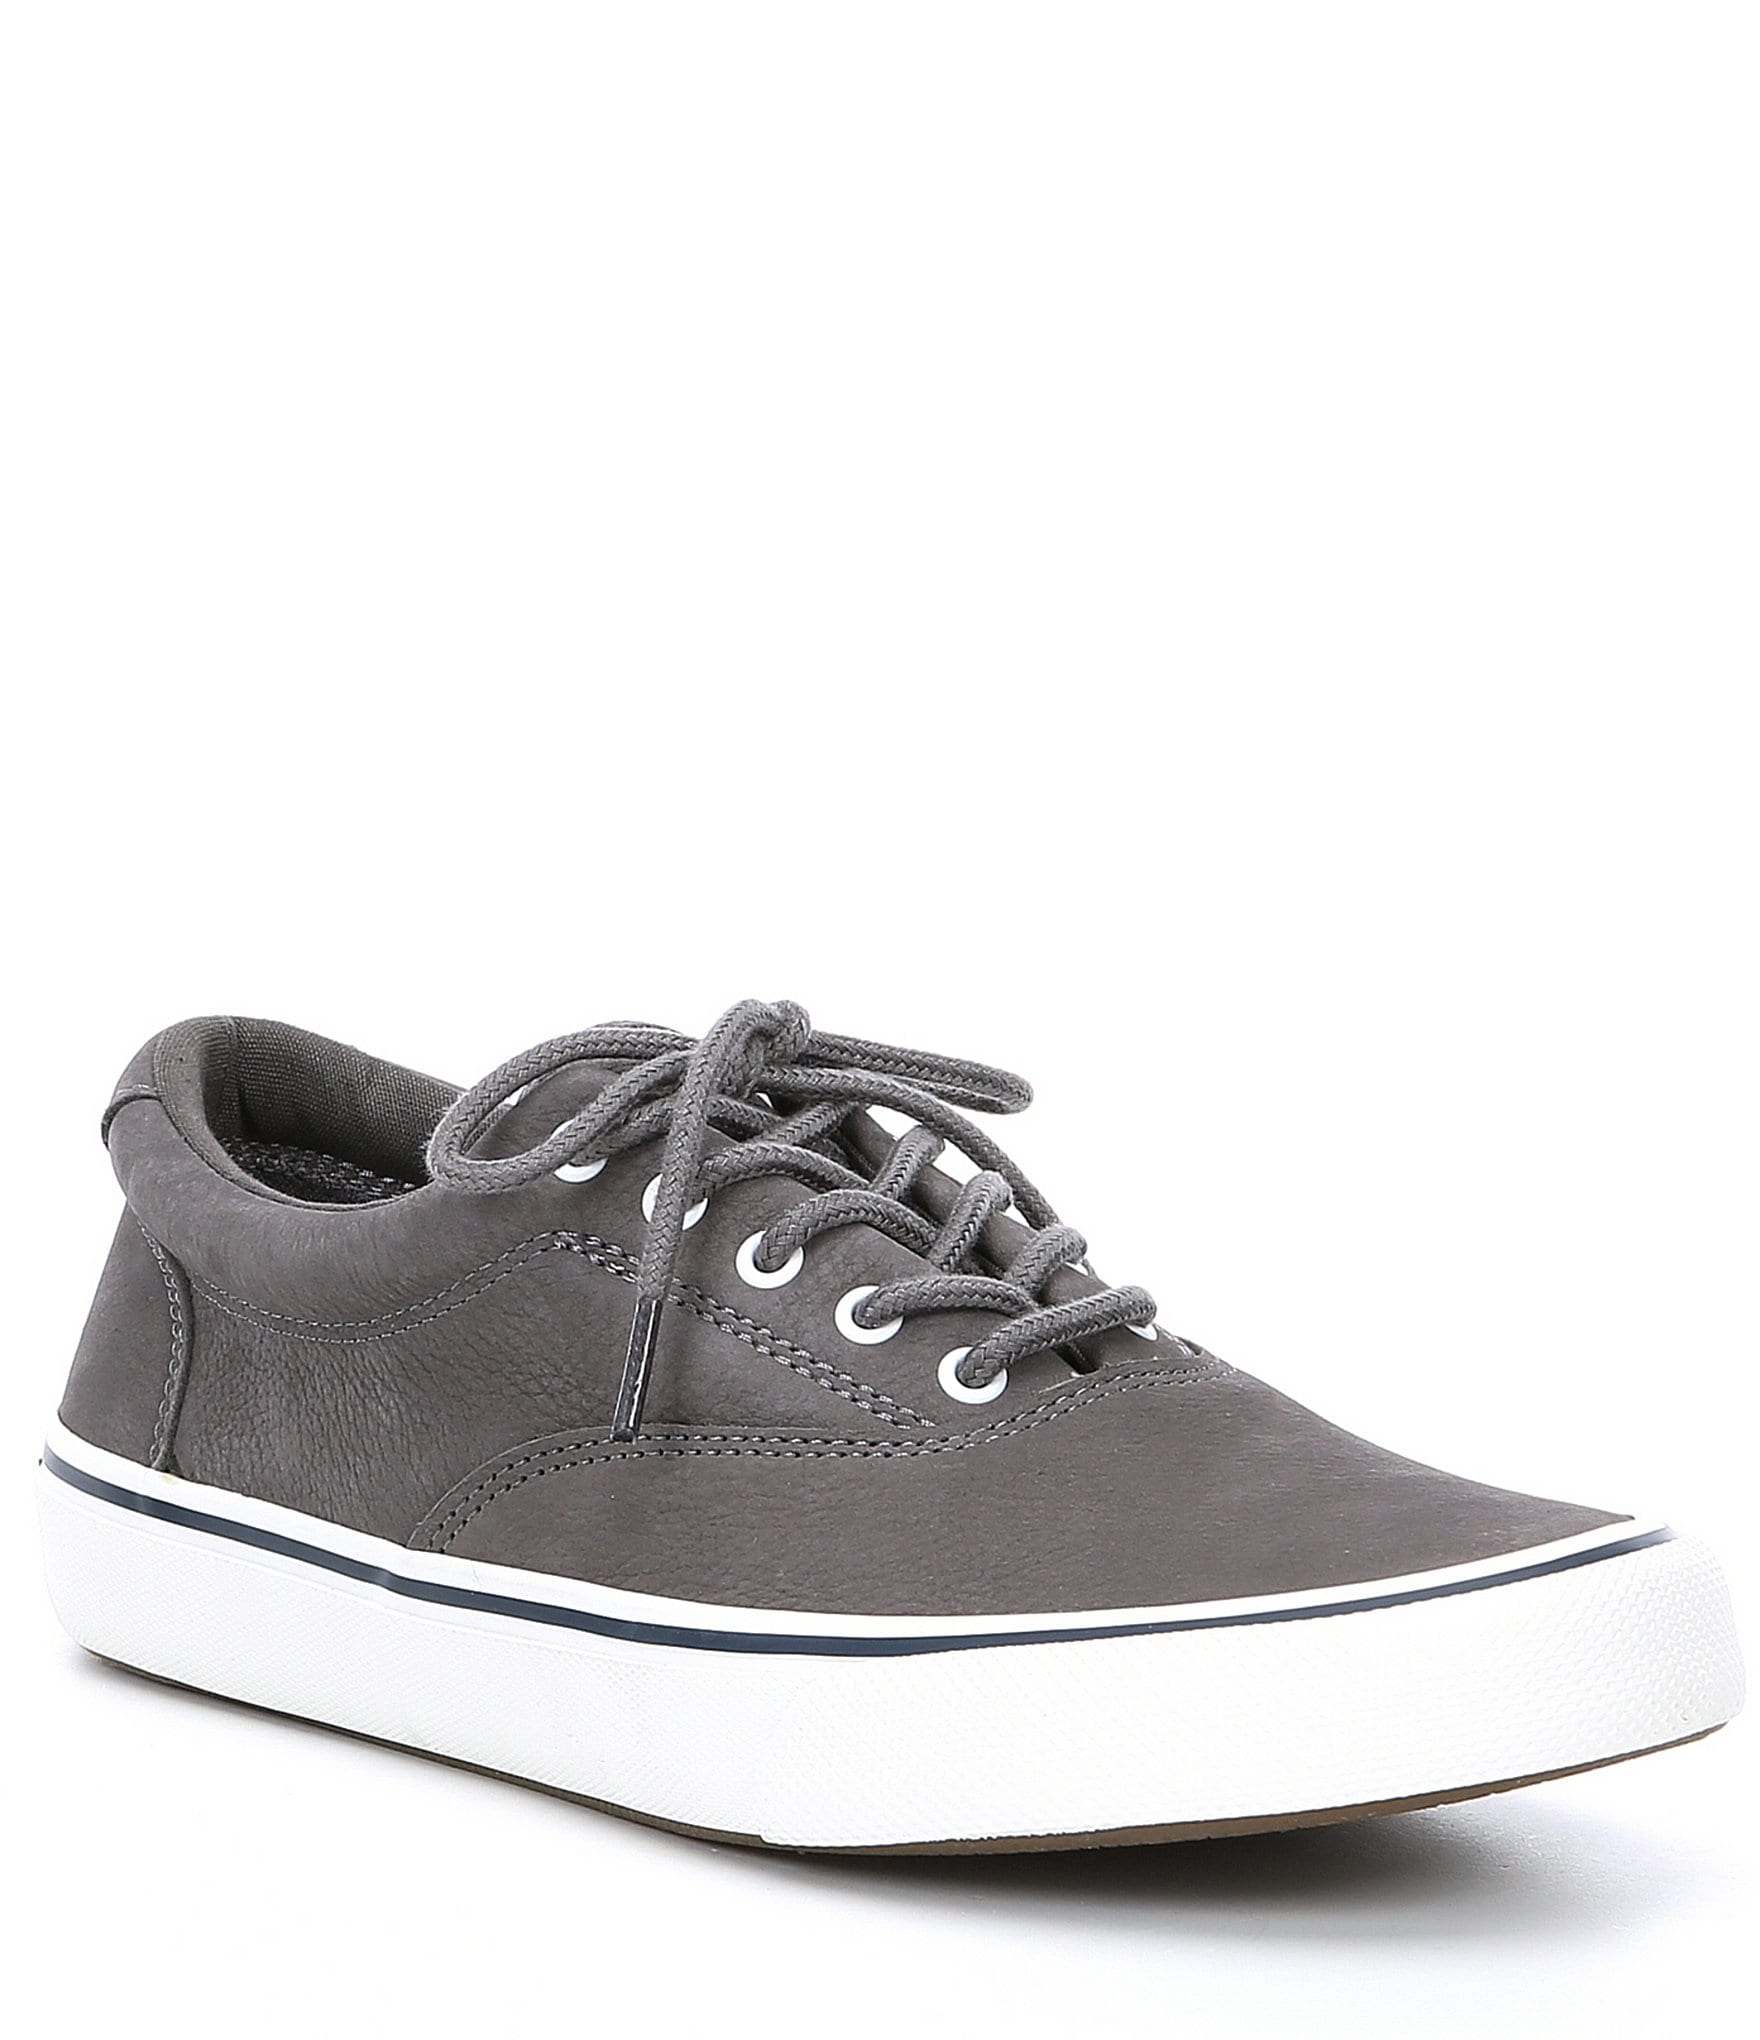 sperry gray shoes